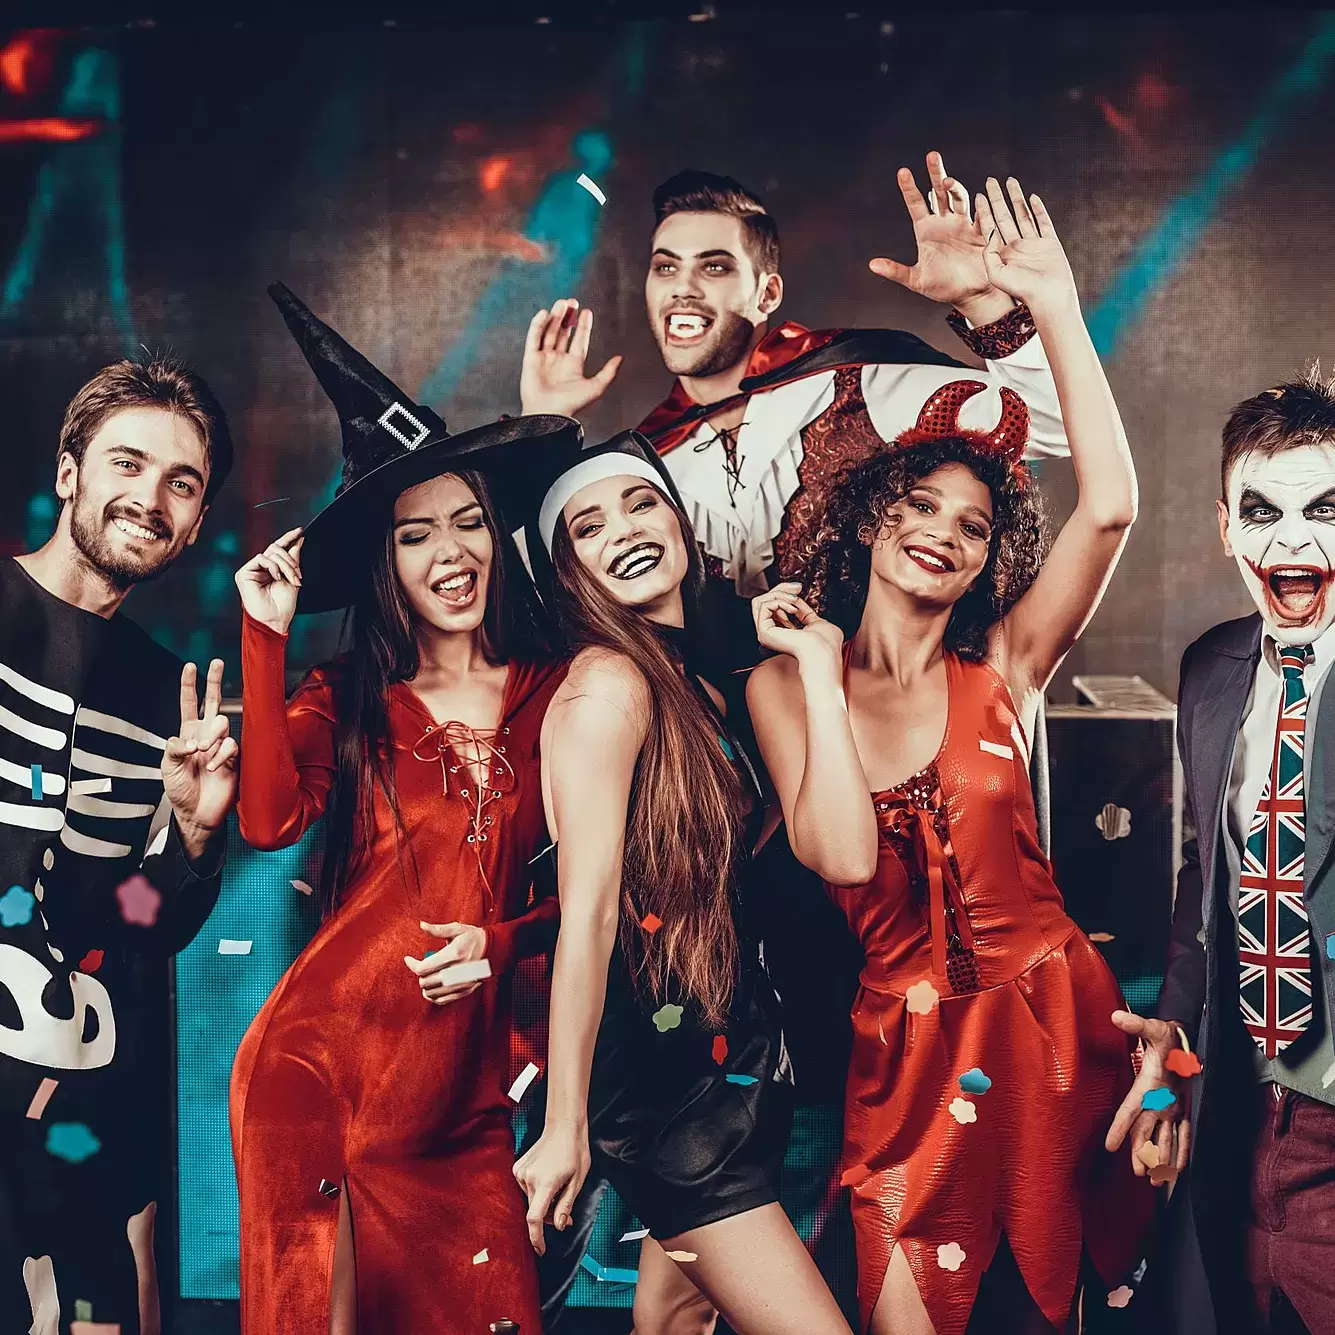 Six adults posing in Halloween costumes.